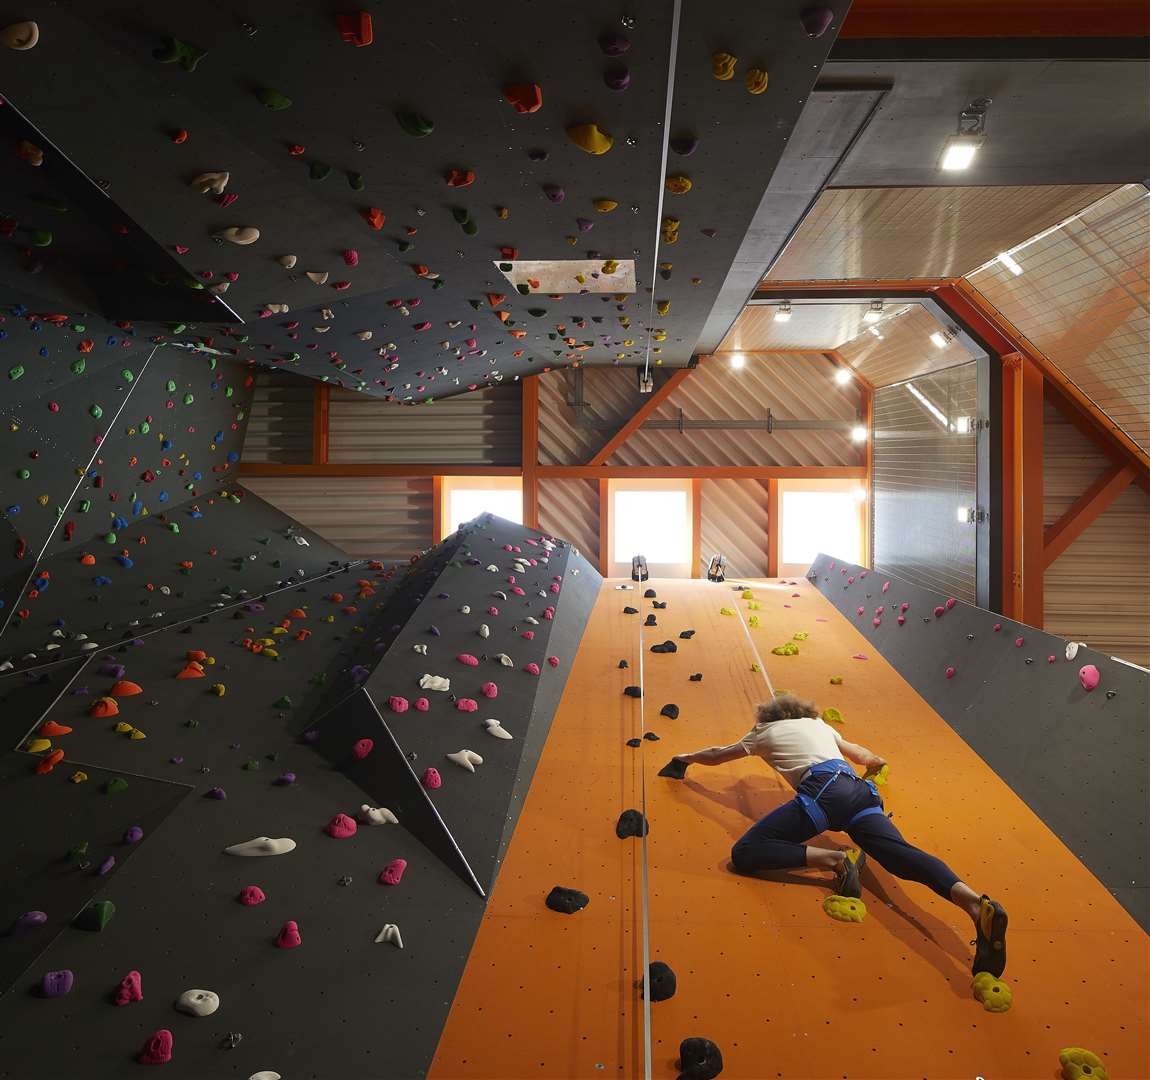 F51 is also home to the tallest climbing wall in the south east. Picture: Hufton+Crow